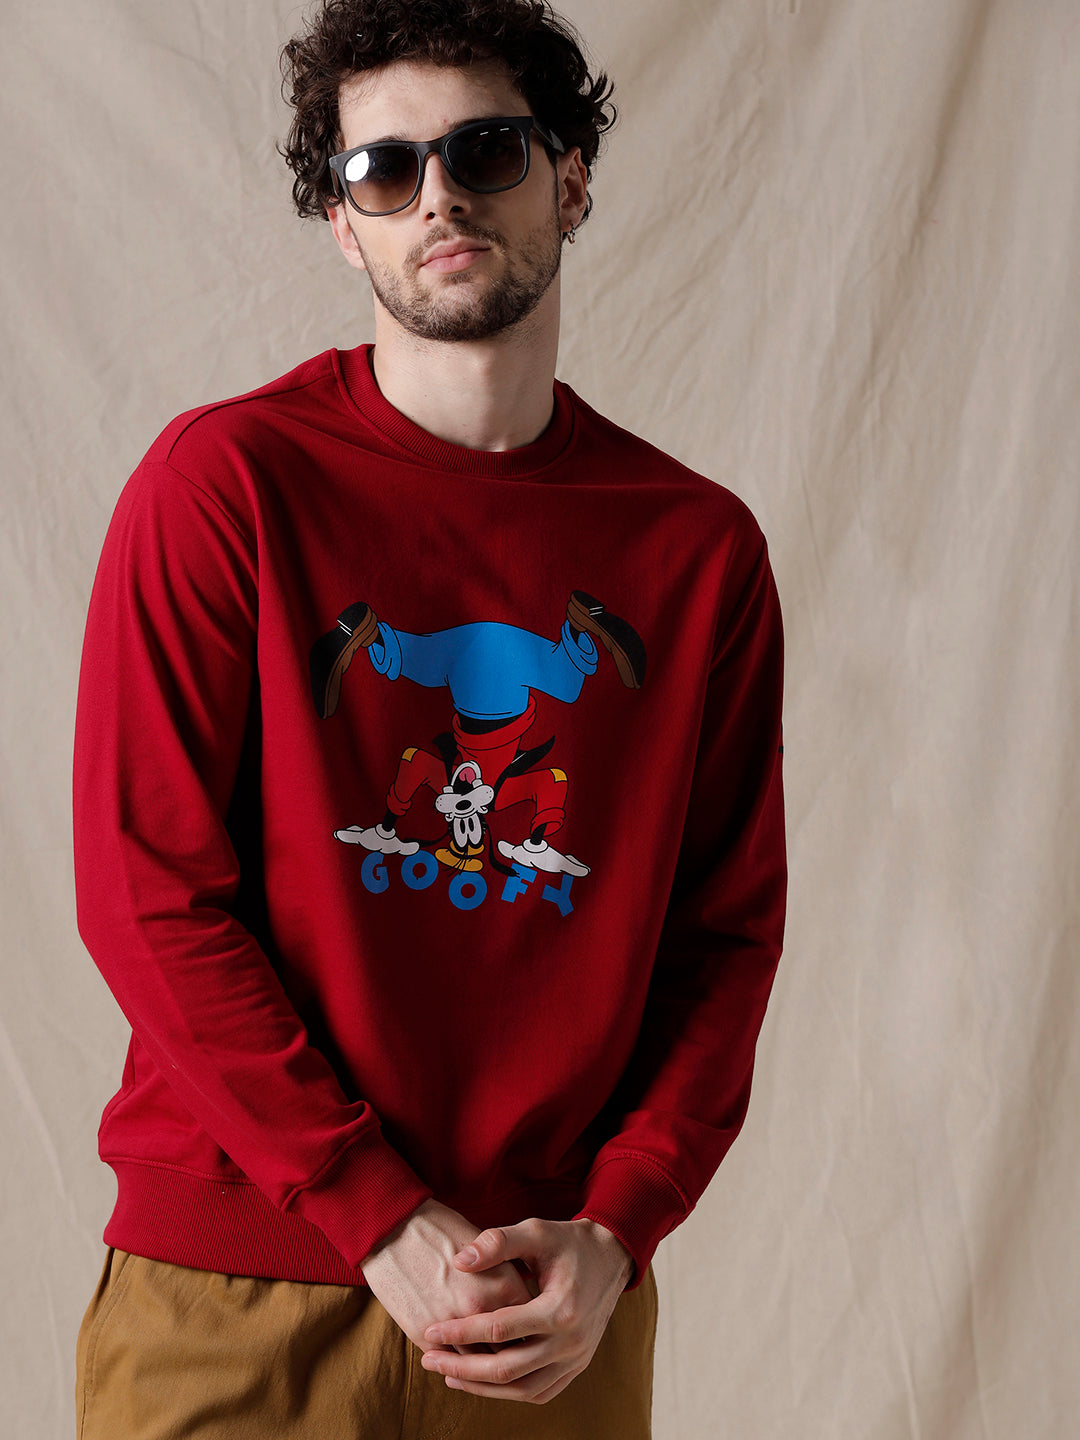 Iconic Red Goofy Pullover